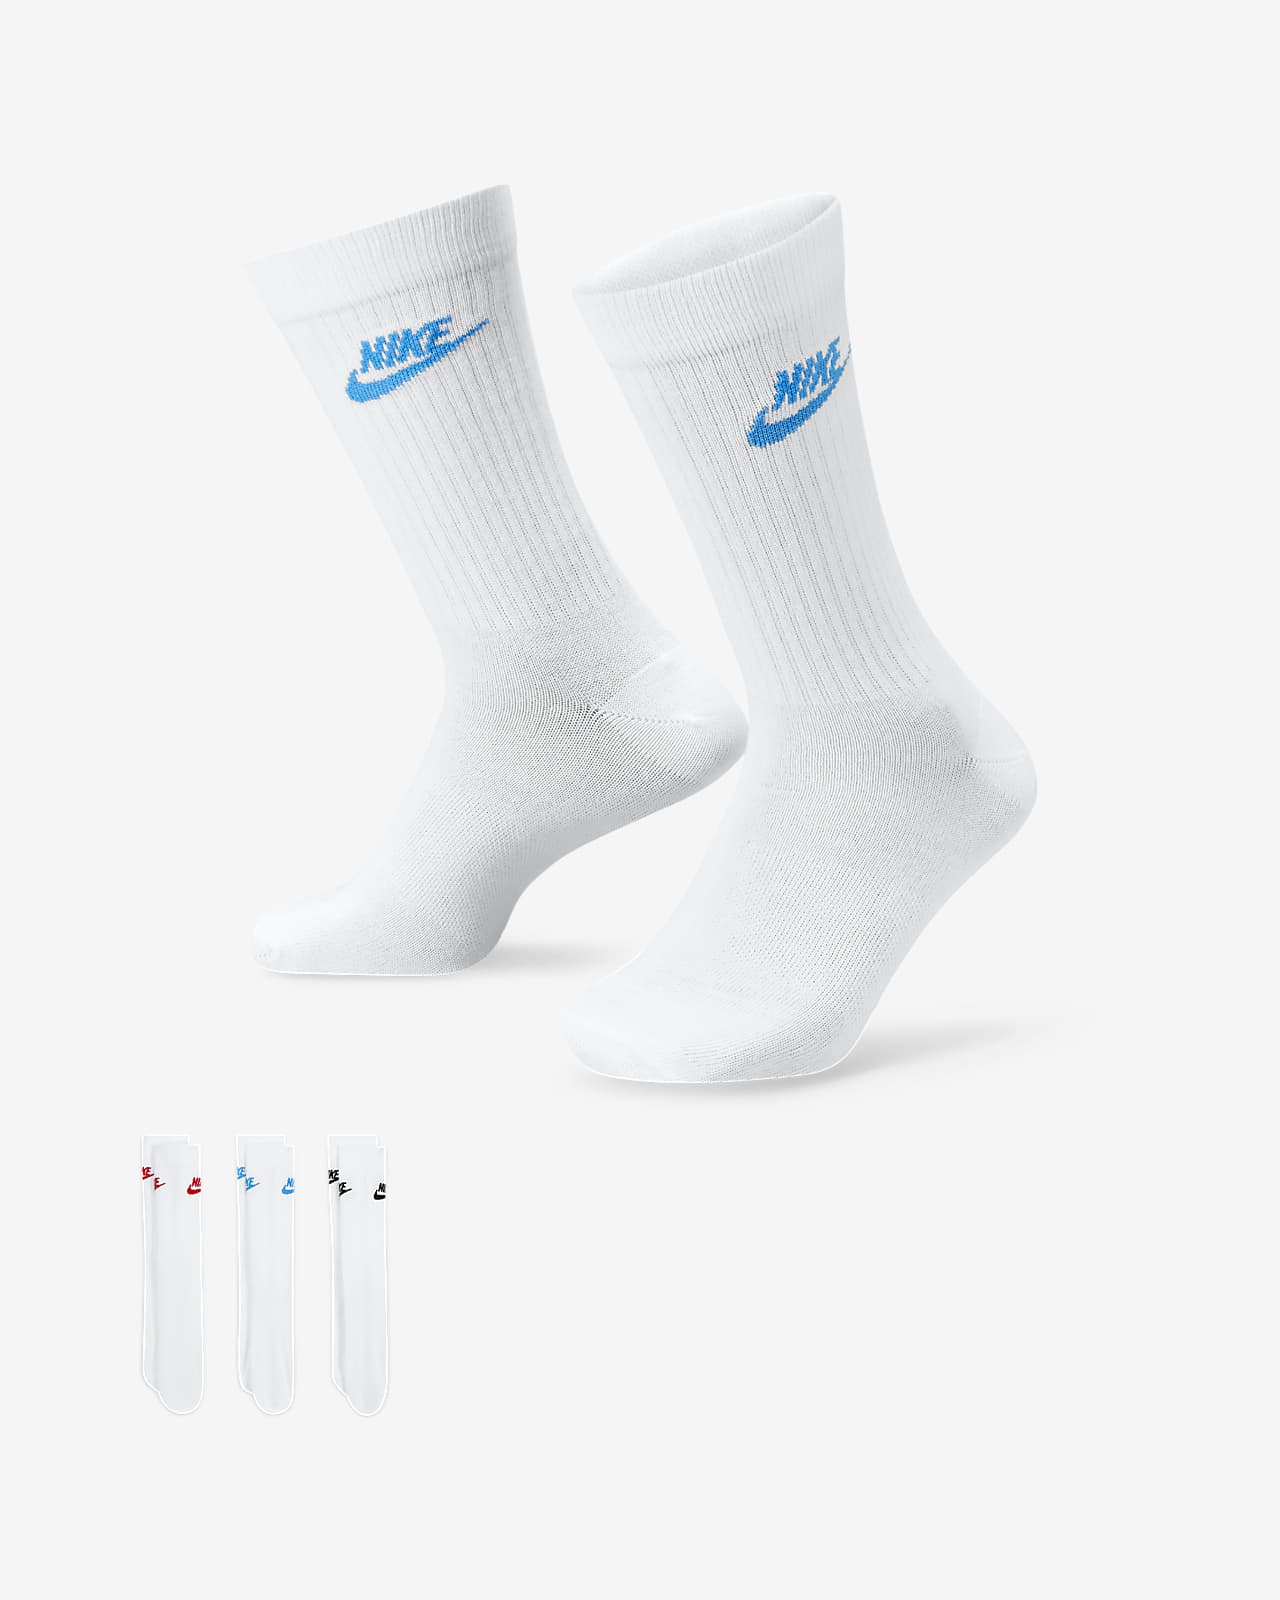 Chaussettes mi-mollet Nike Sportswear Everyday Essential (3 paires)